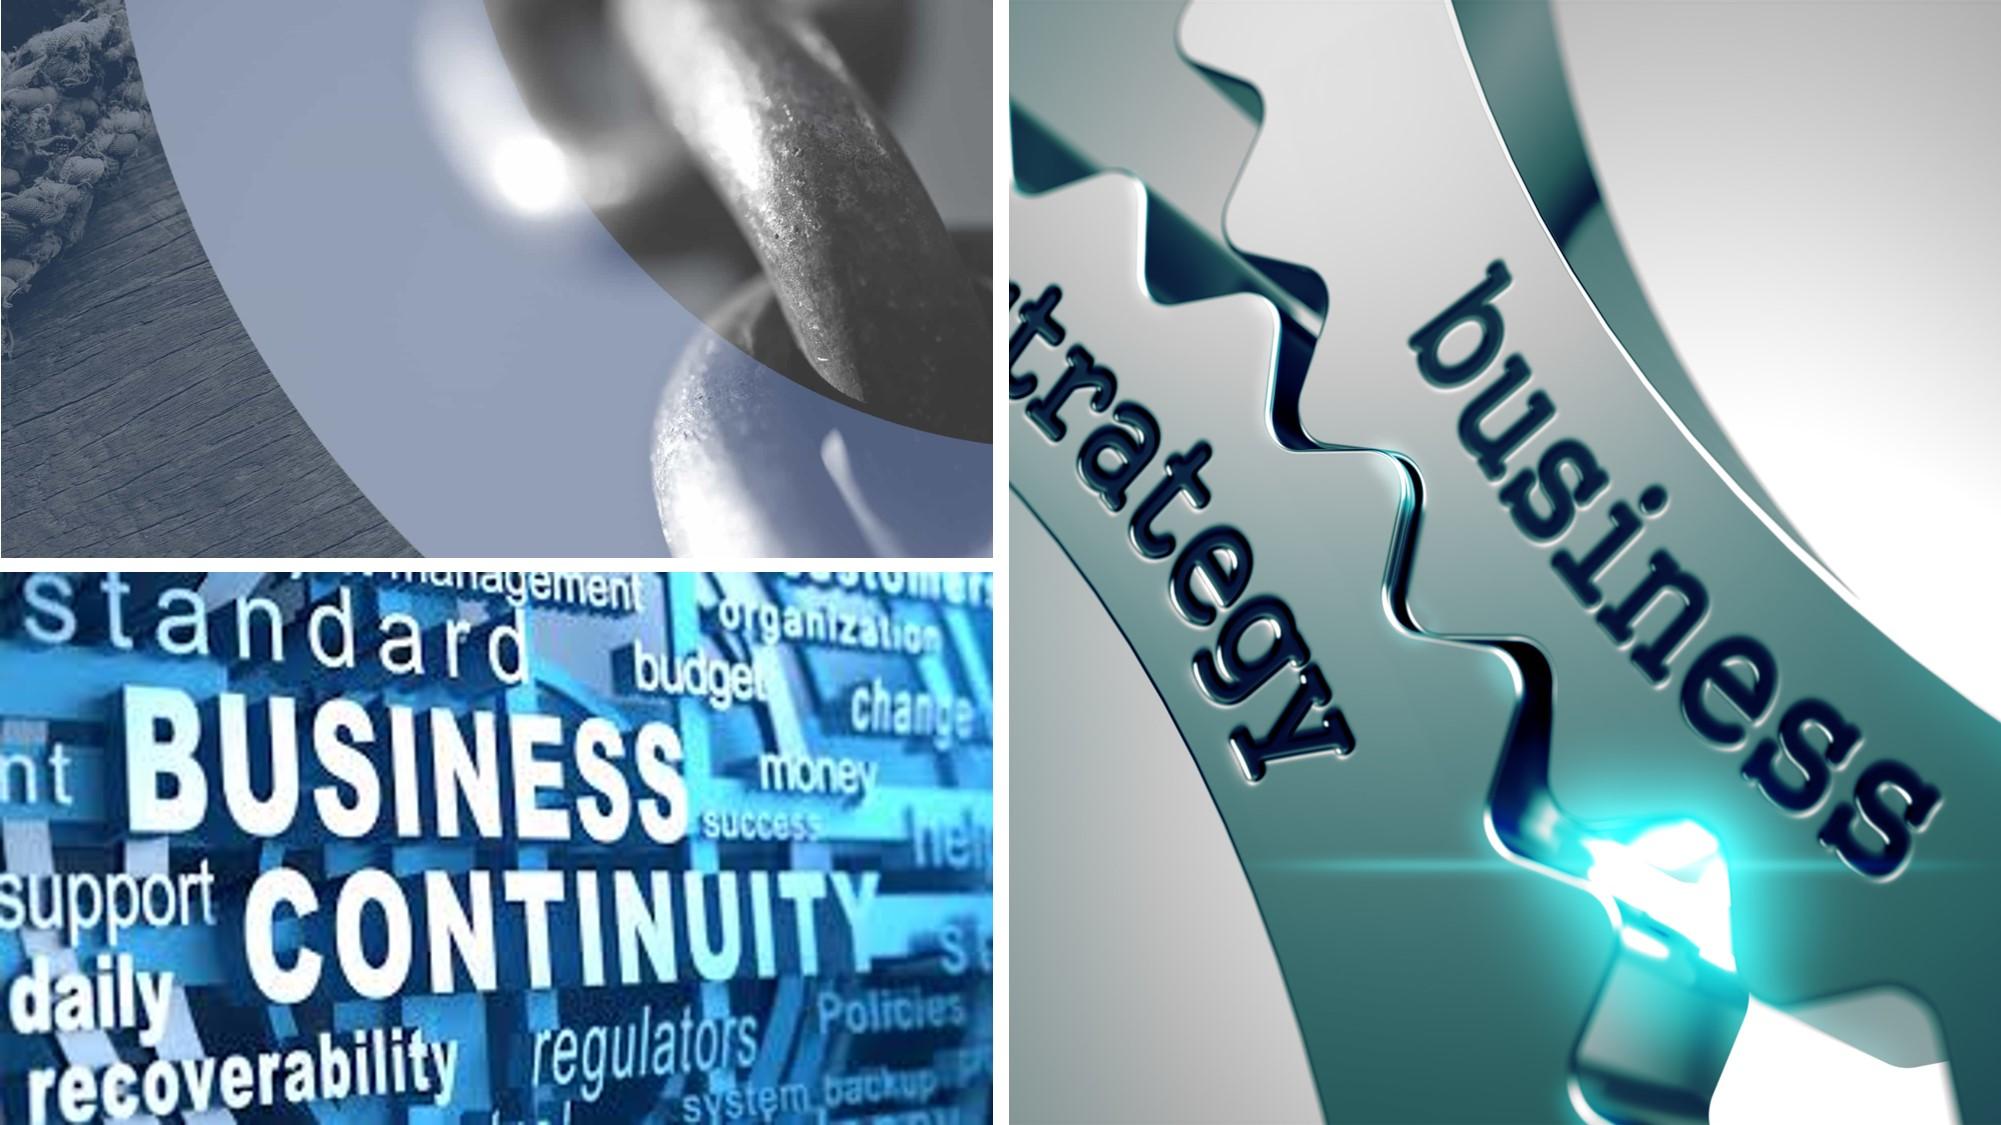 Business Continuity Management